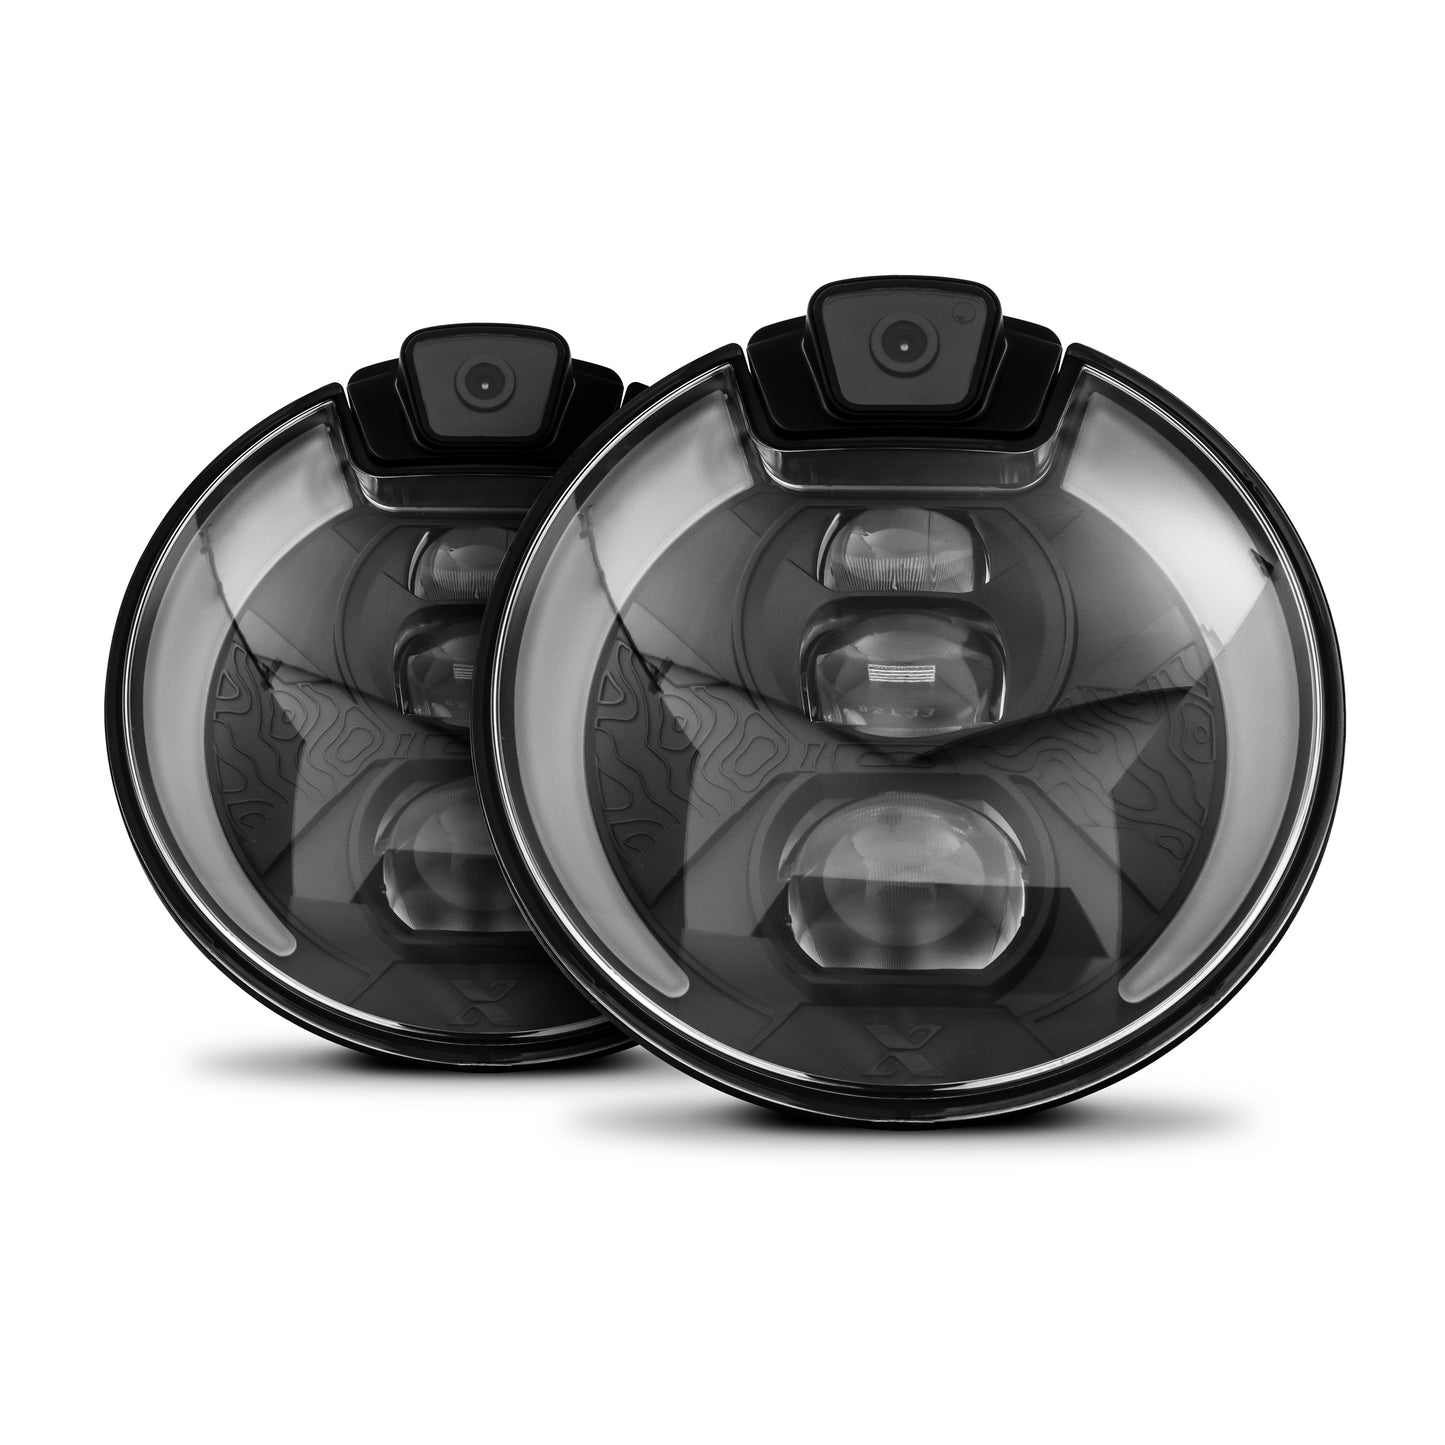 PROJECT X - HL538822-1 - Headlight Set -  - 7 in Headlight with 4K / wide angle Camera - P/N: HL538822-1